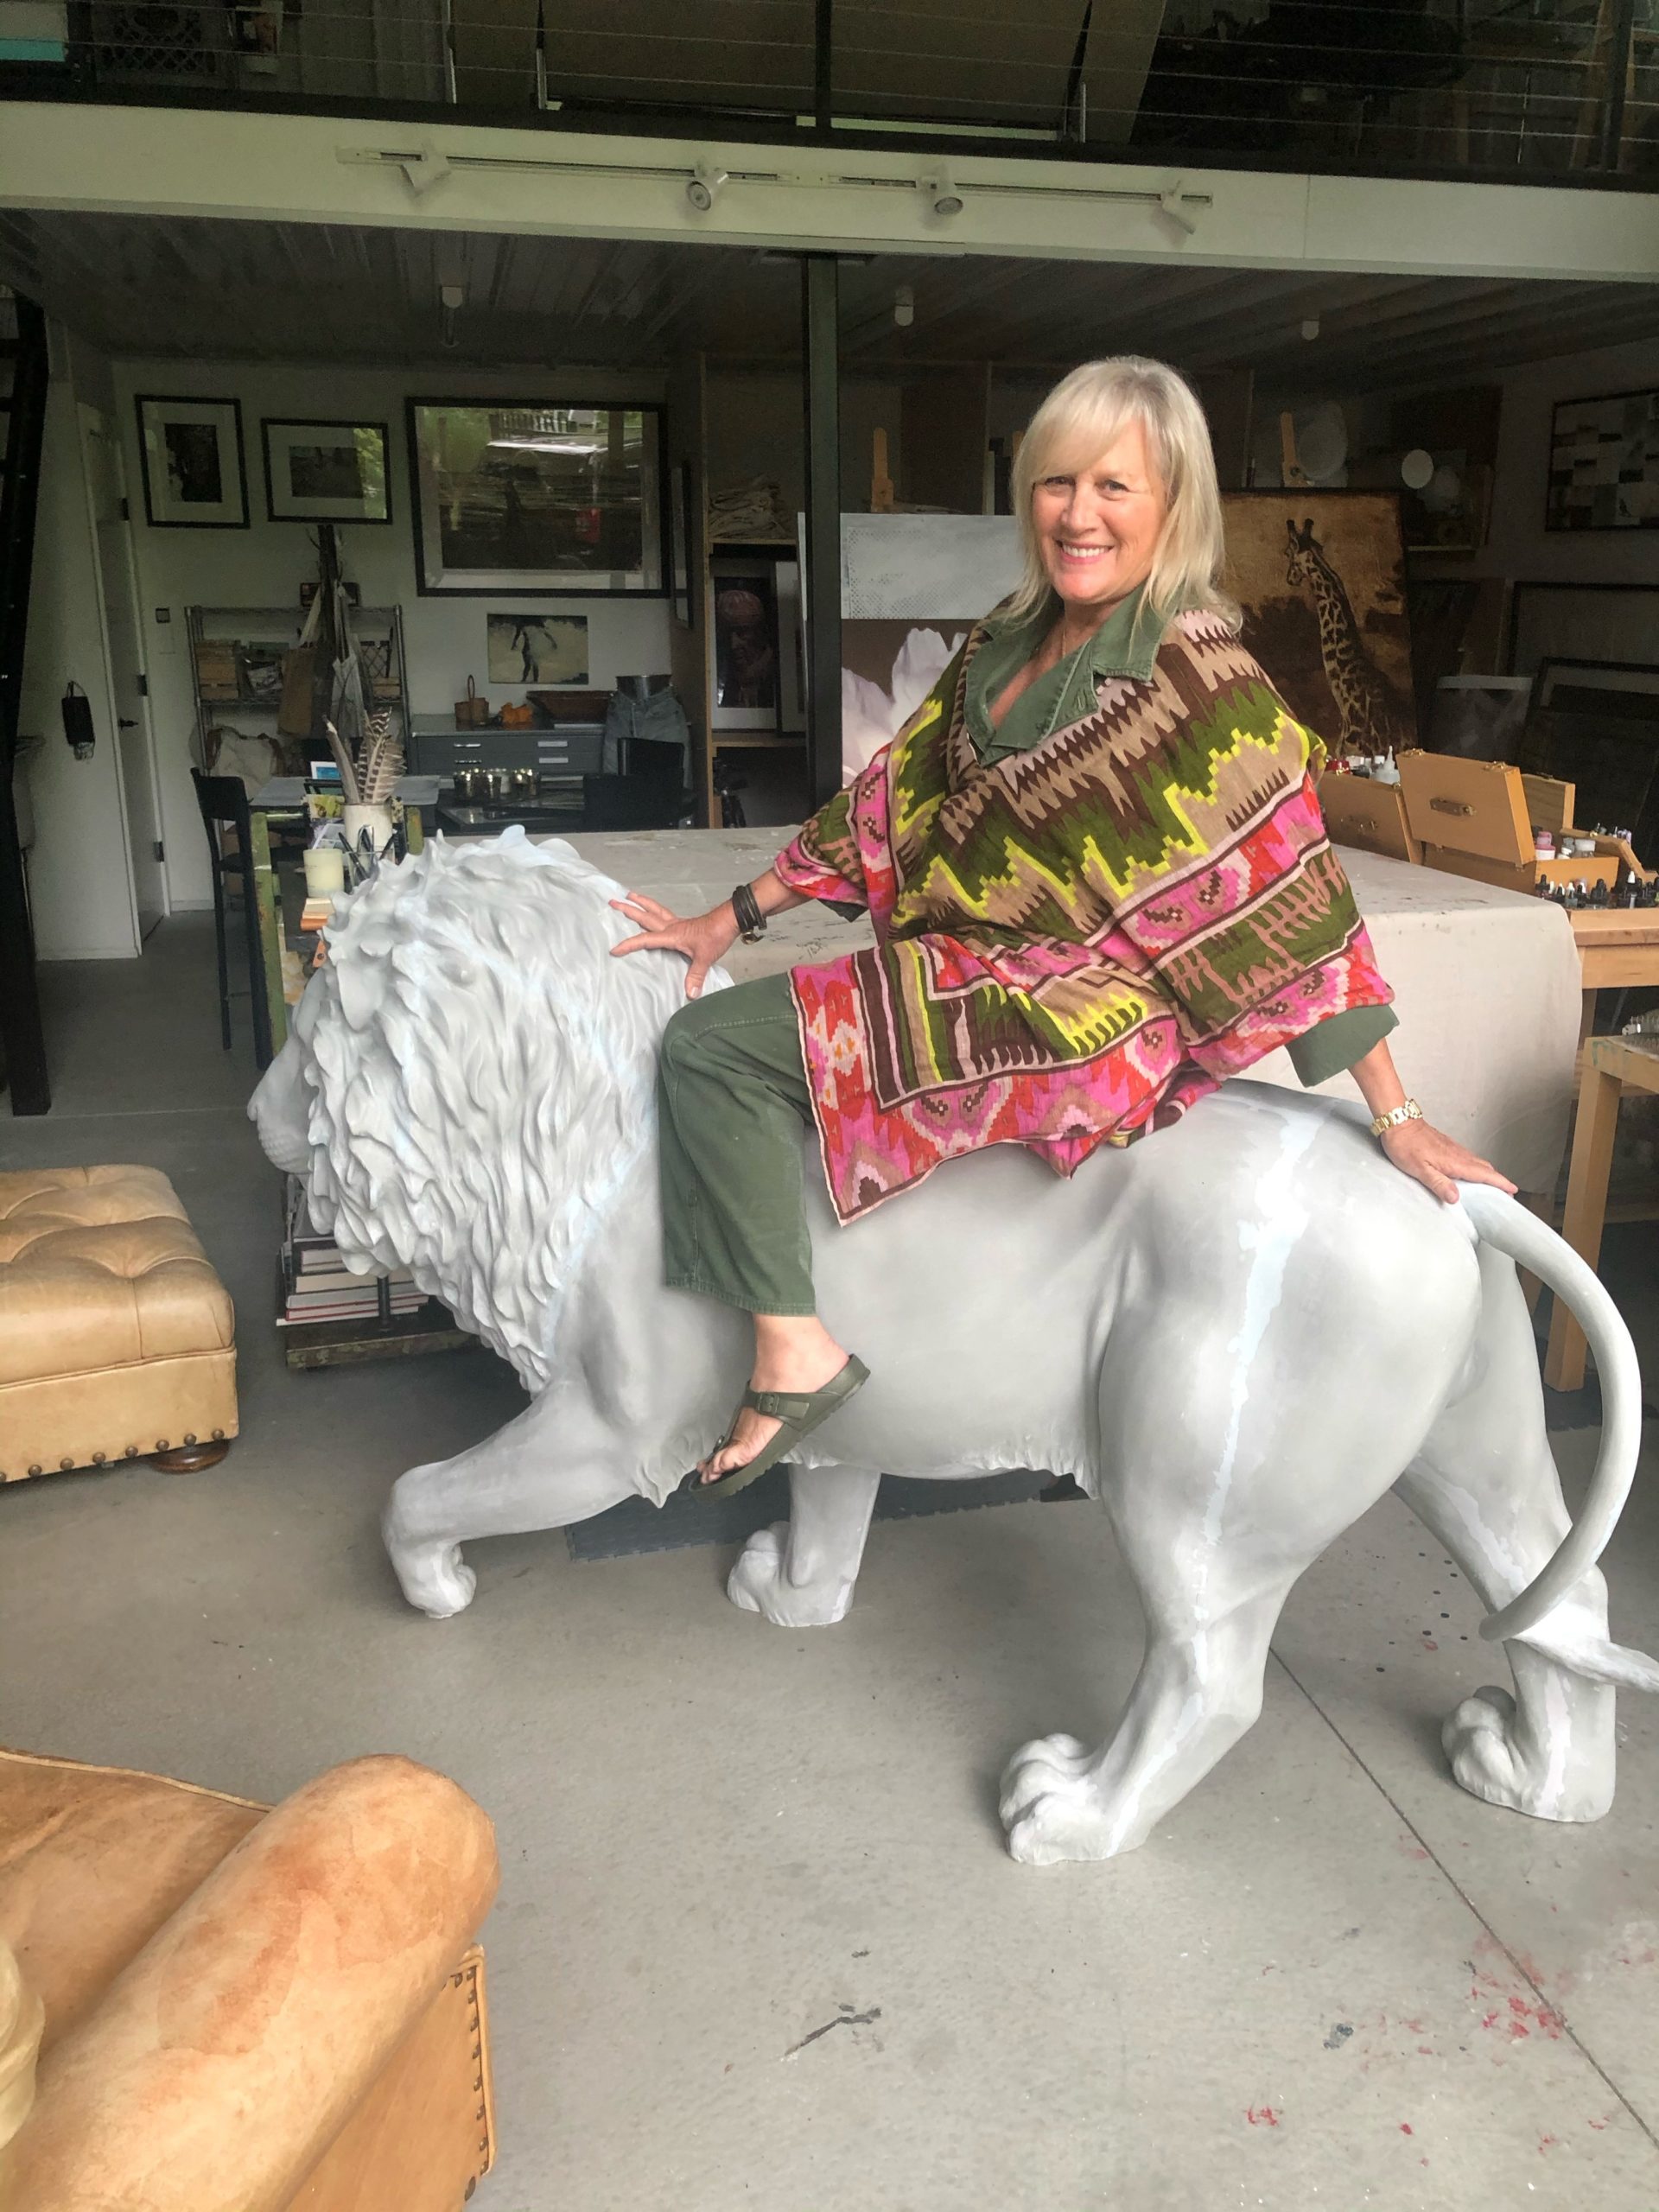 Beth O’Donnell atop her lion sculpture.